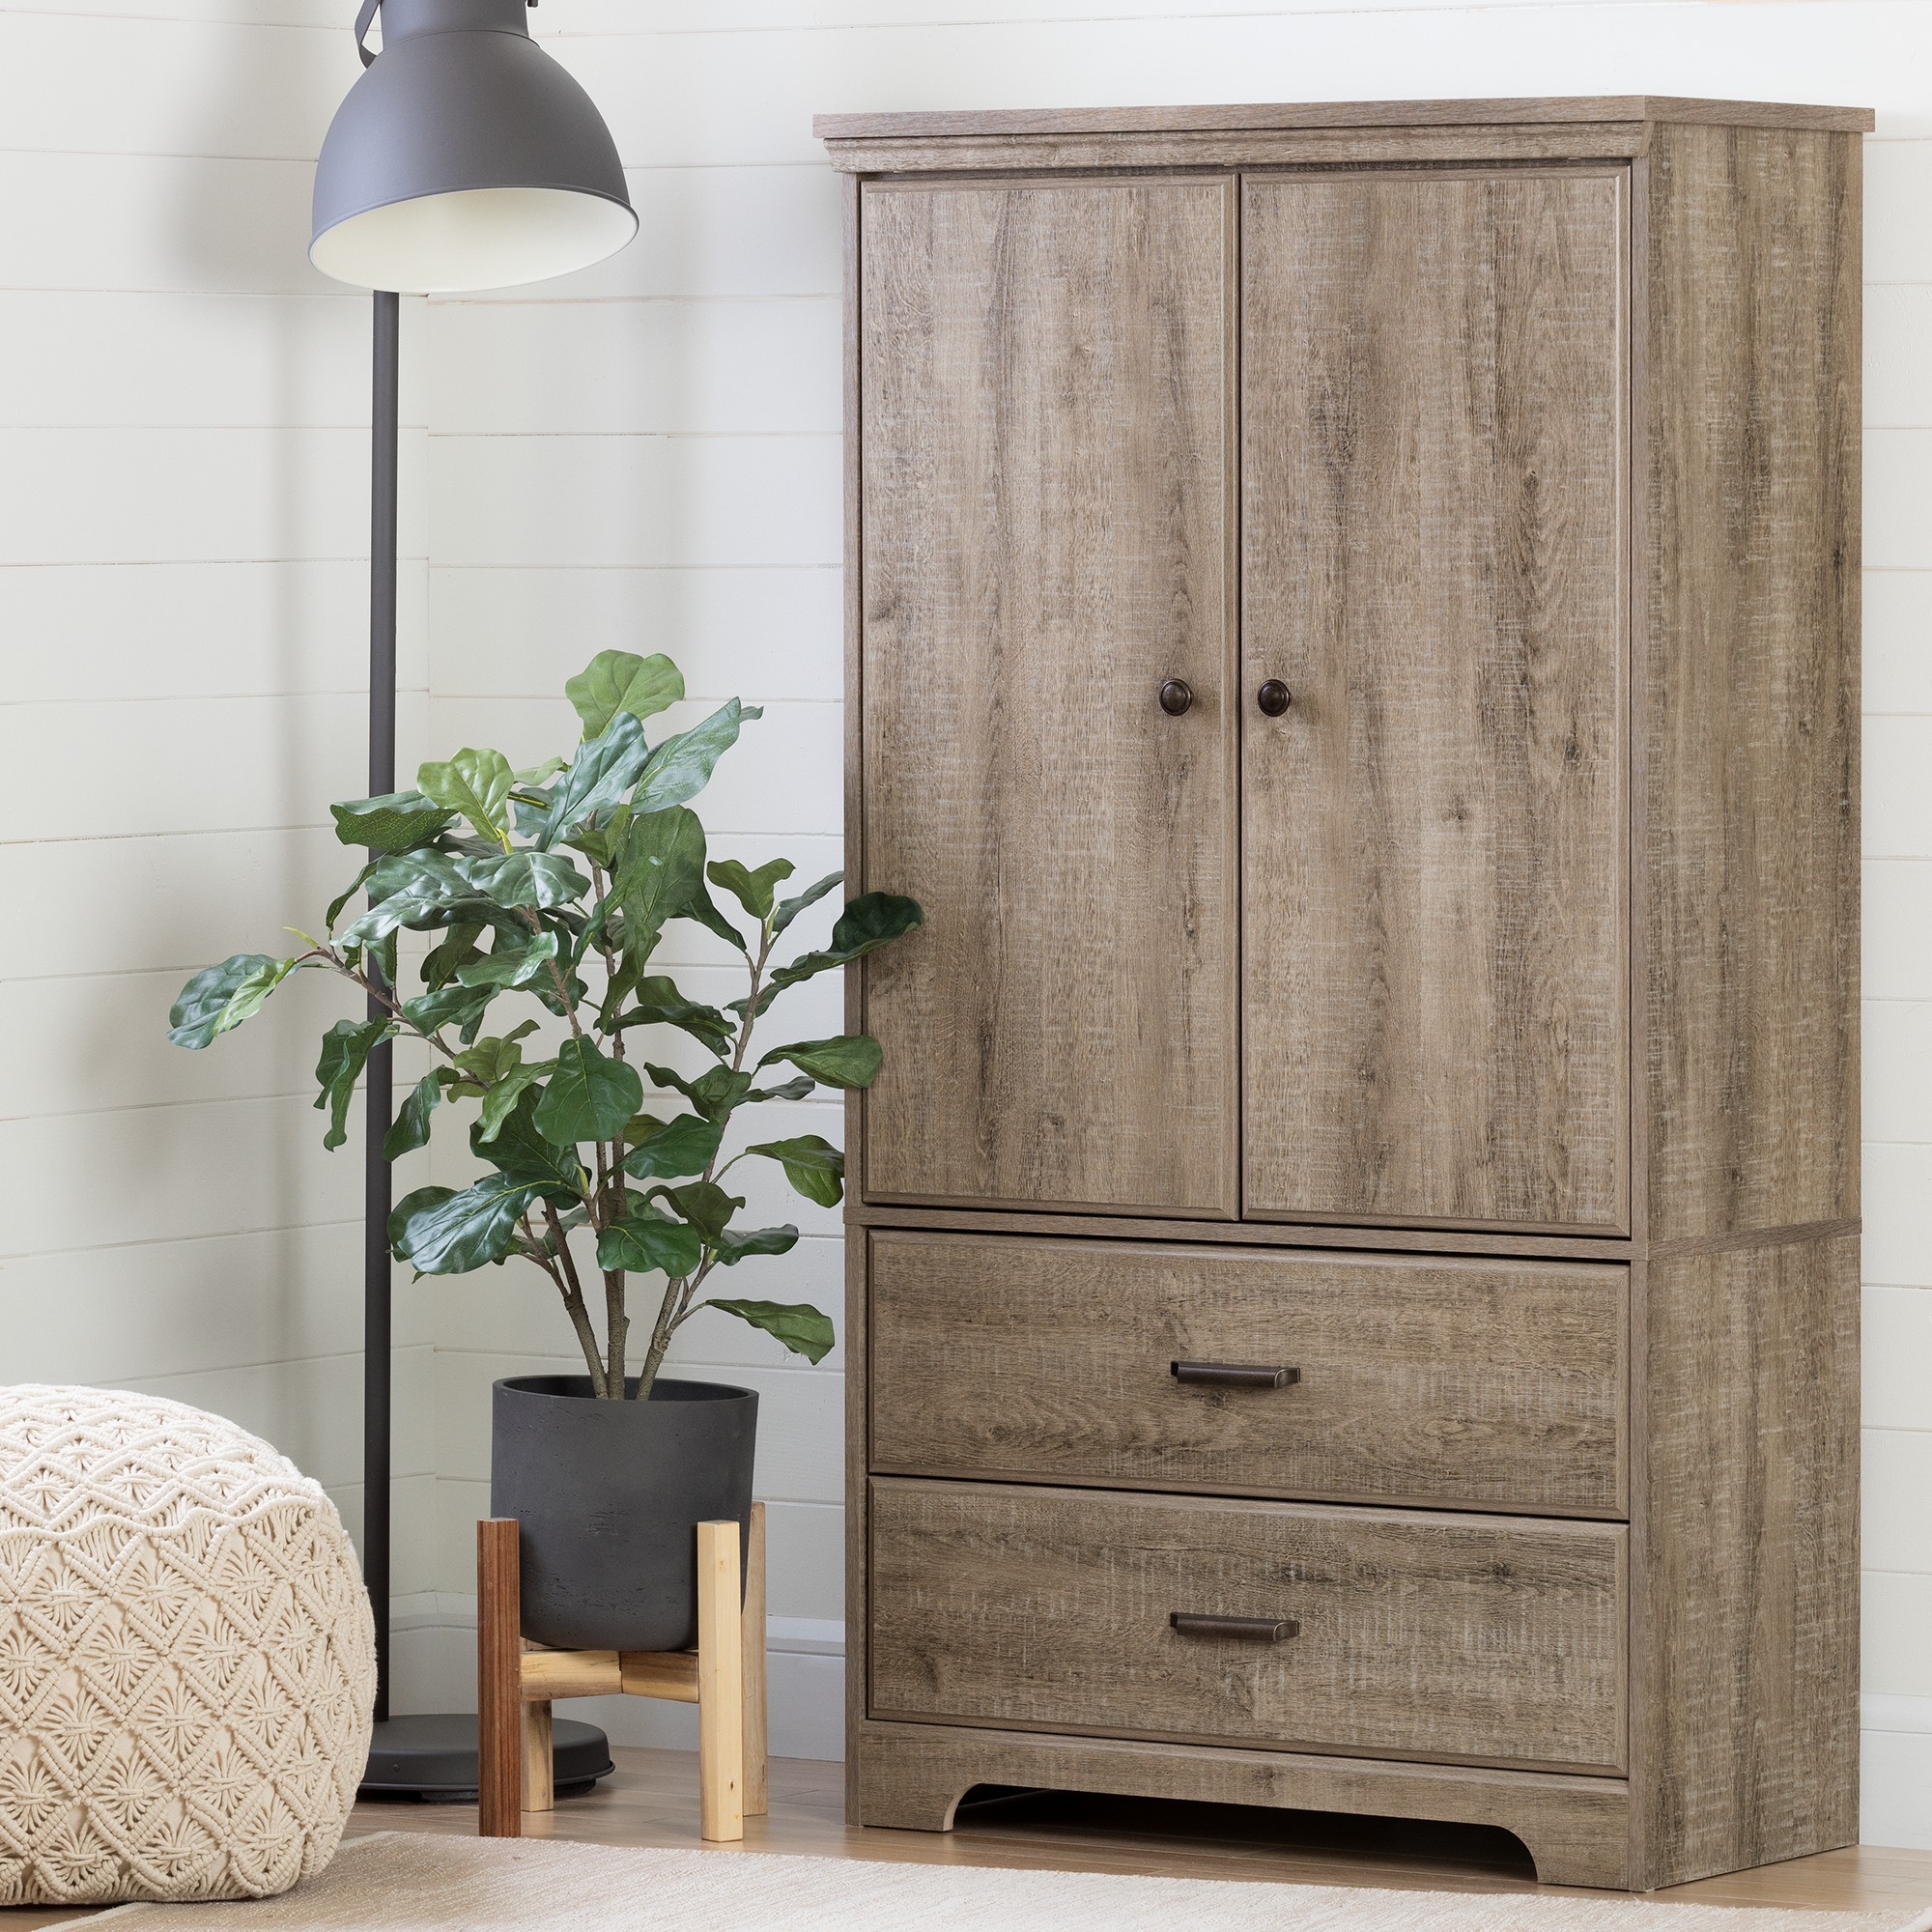 South Shore Versa 2-Door Armoire with Drawers, Weathered Oak